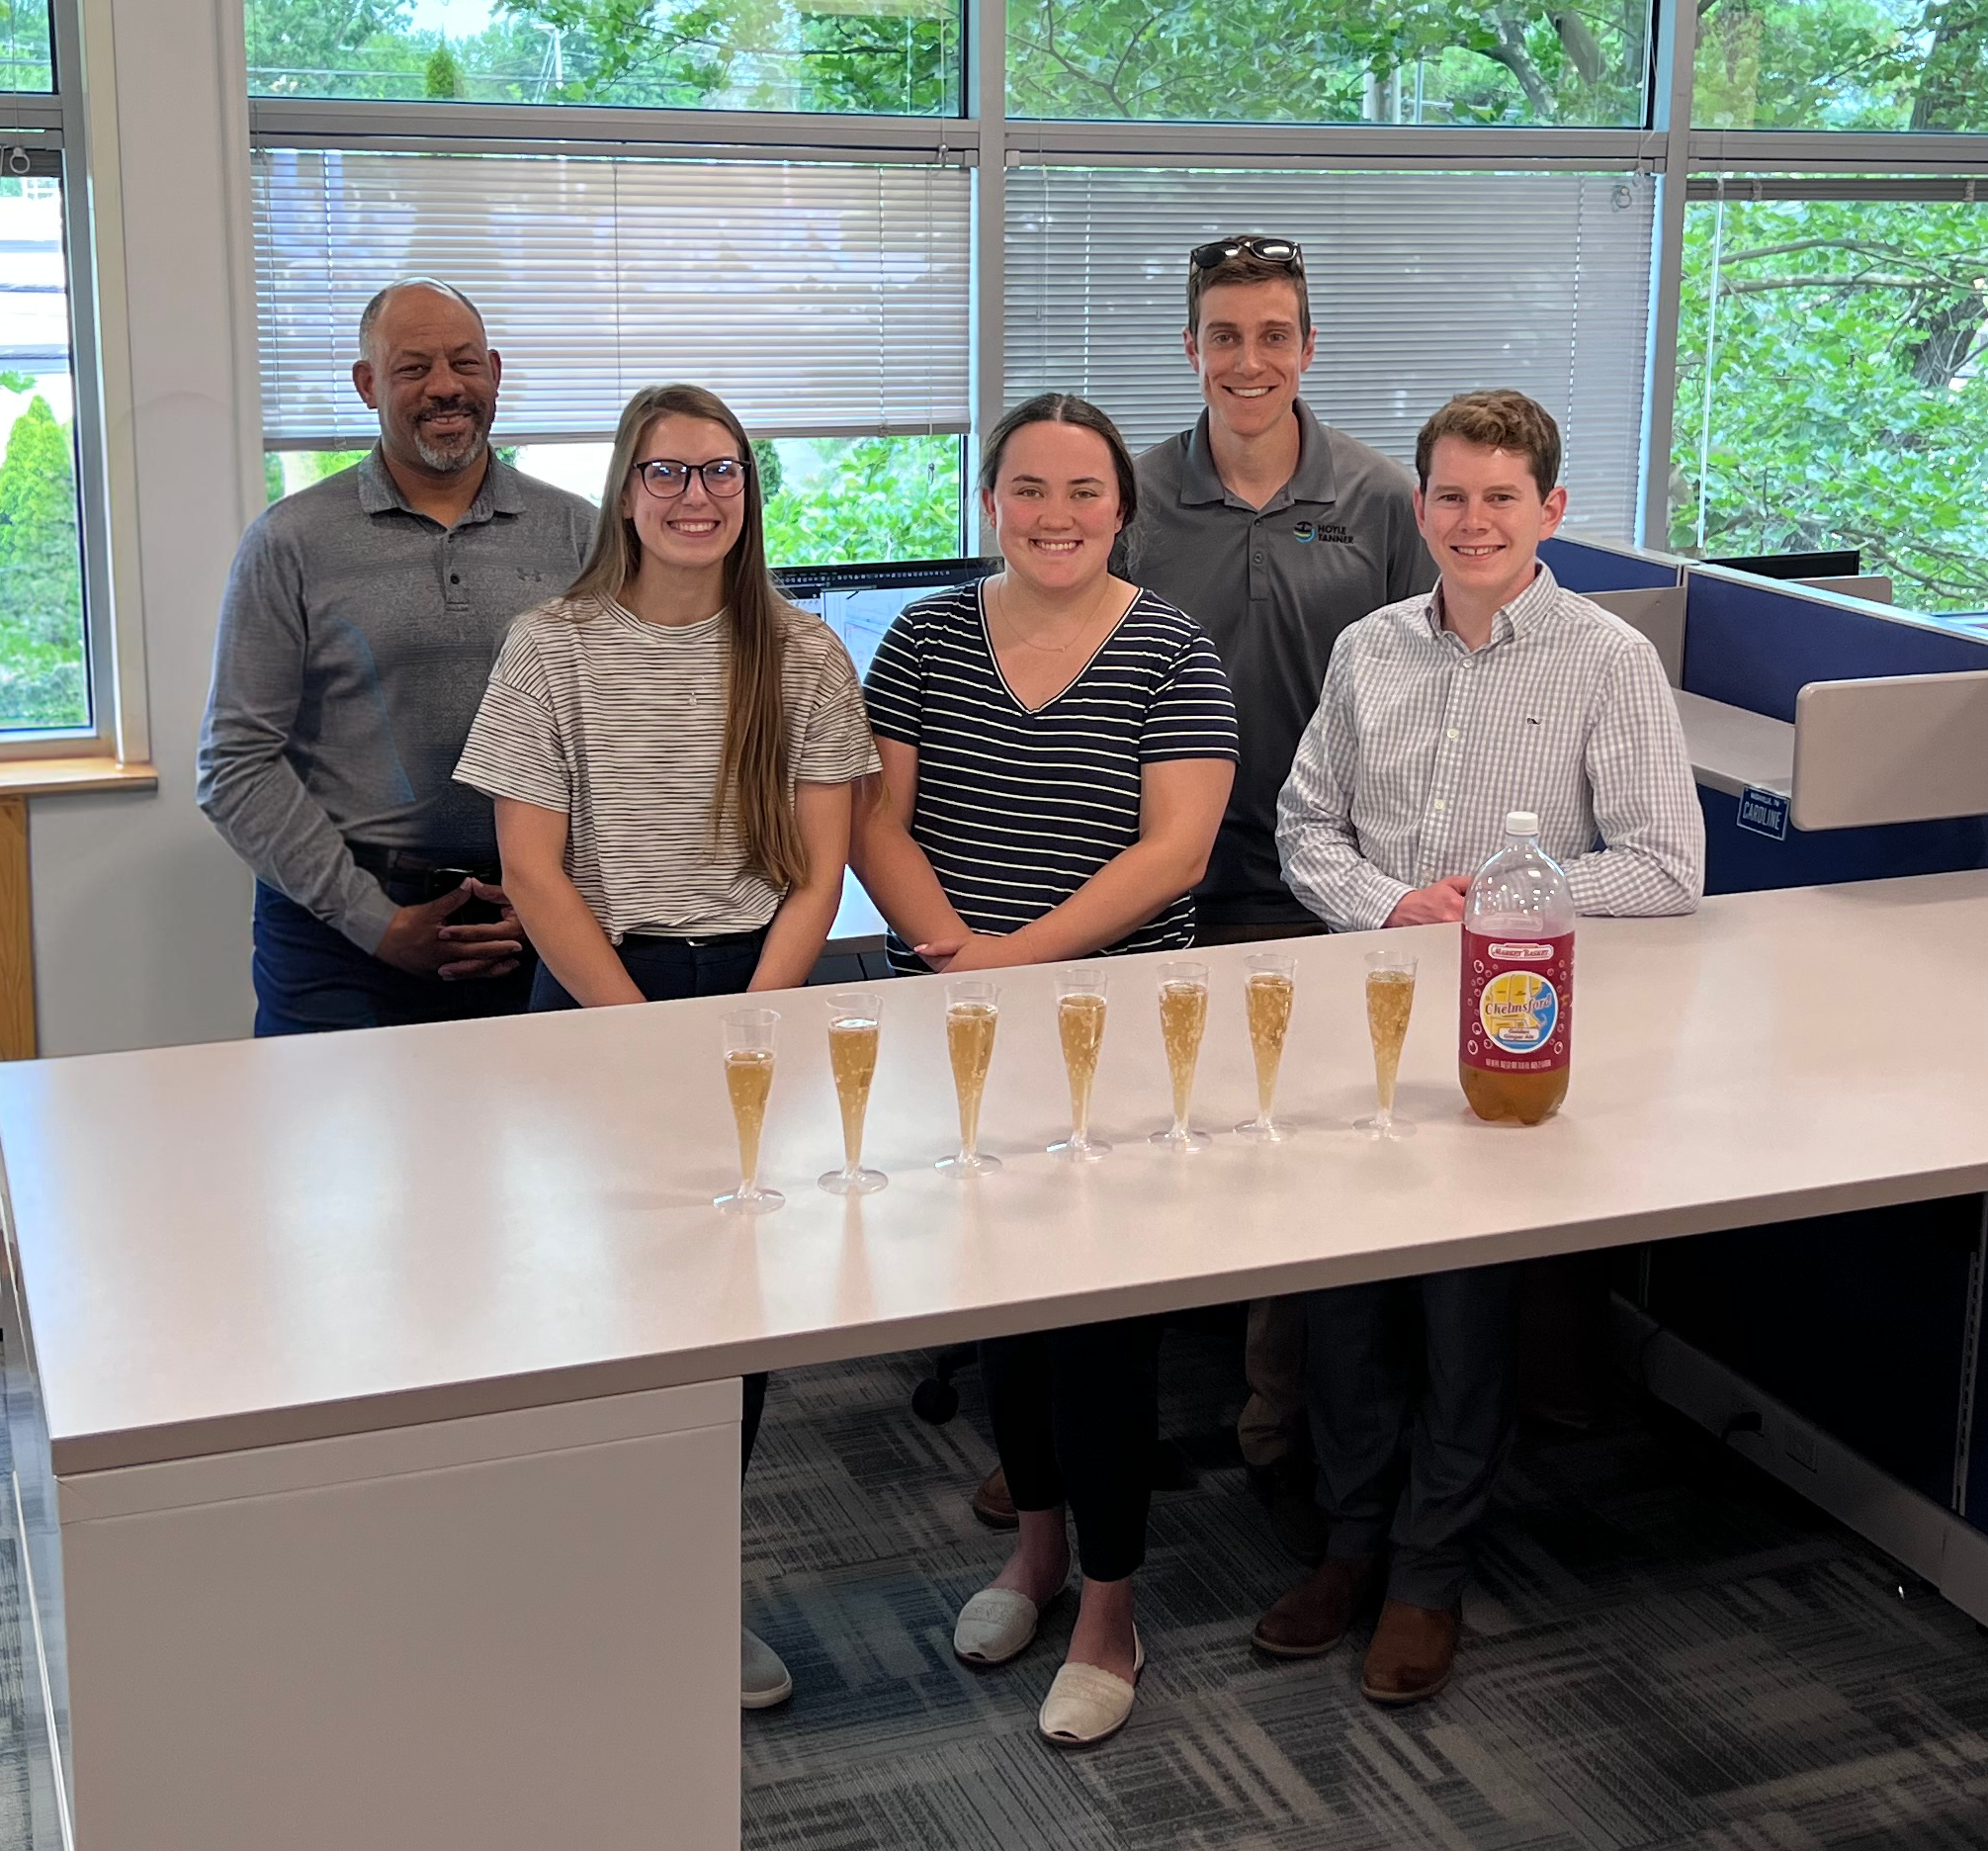 Staff toasts with the local Chelmsford Ginger Ale in the Chelmsford office.